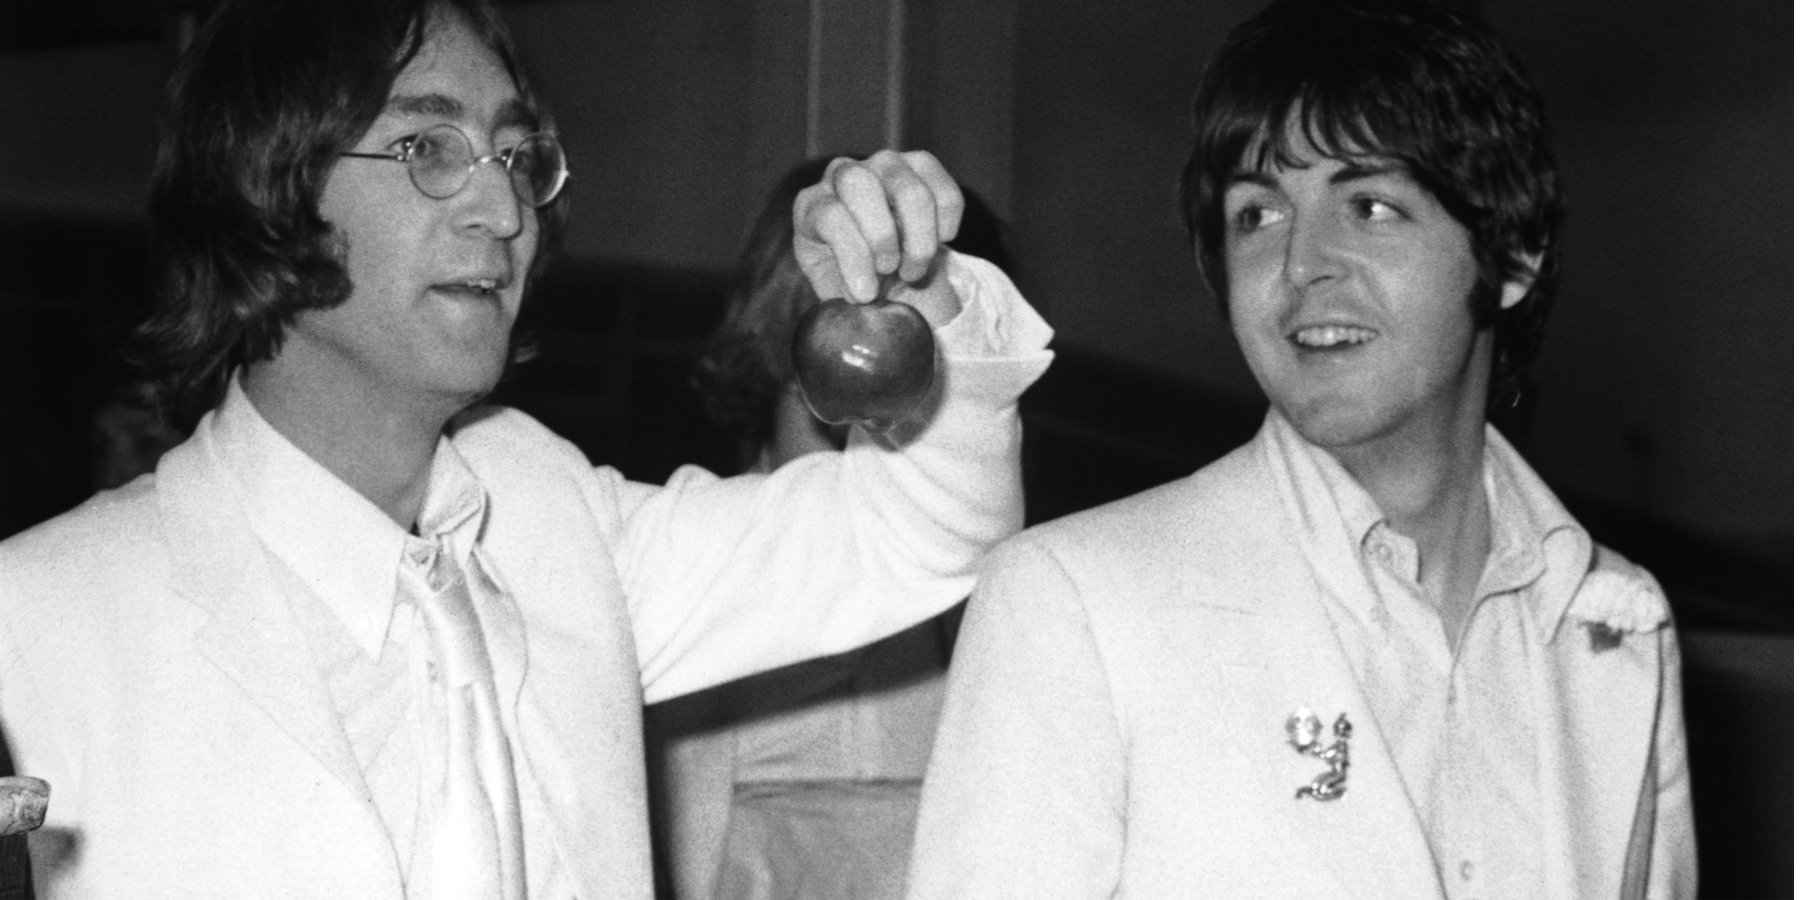 John Lennon and Paul McCartney both dressed in white and carrying apples to promote their new company Apple Corps.